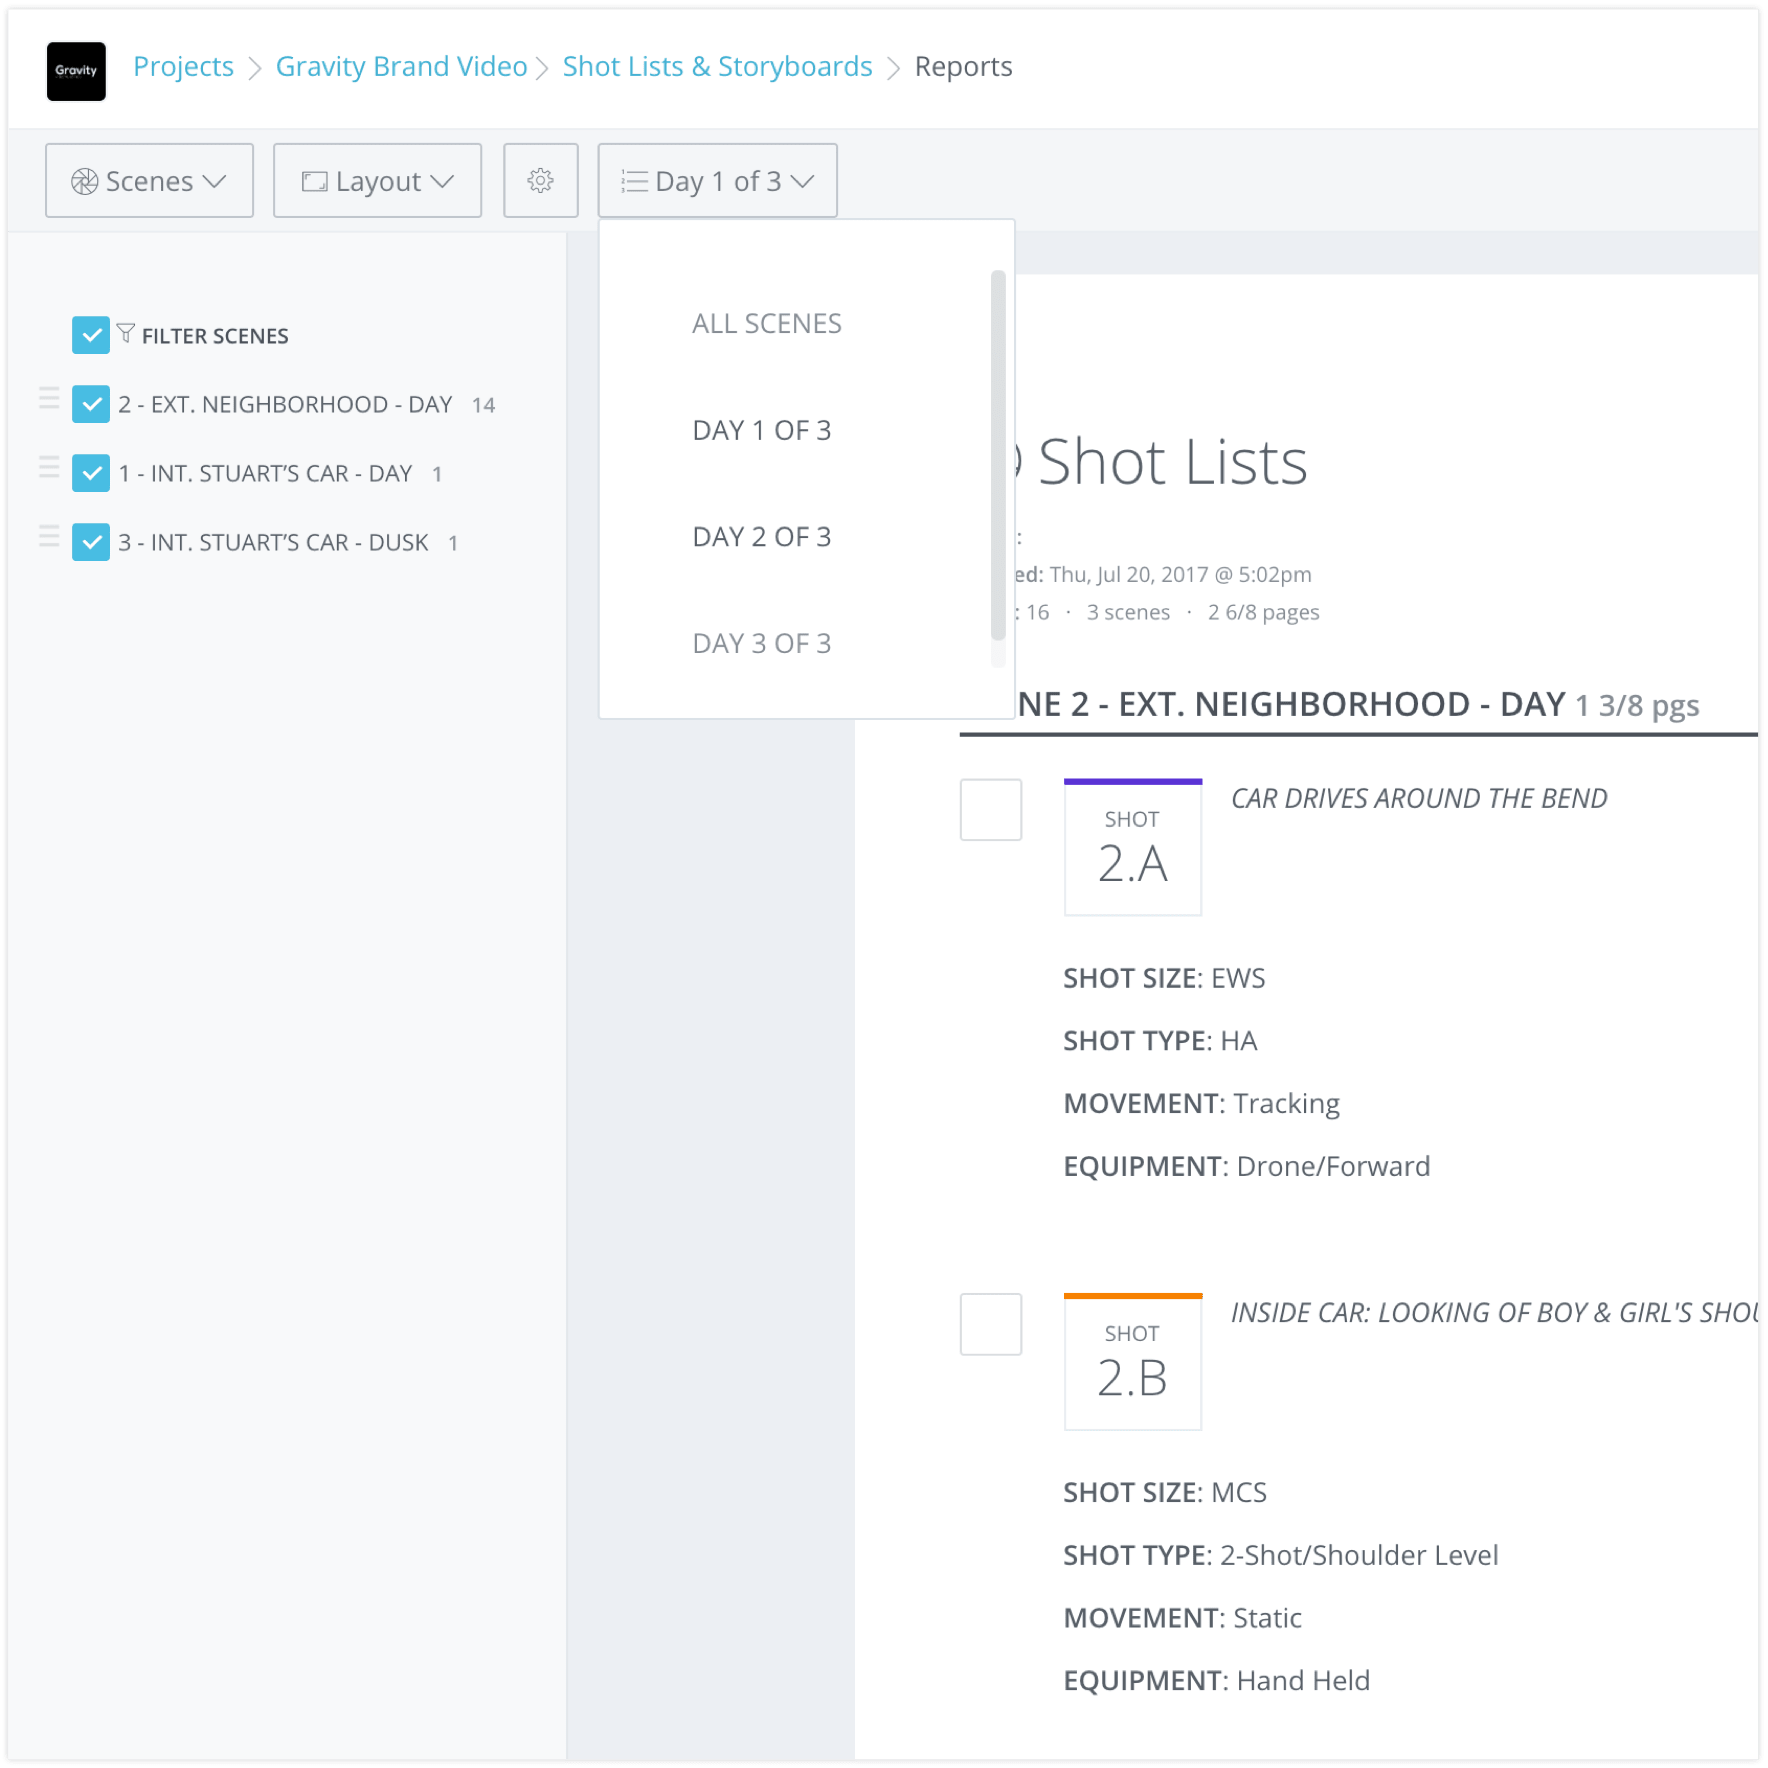 Introducing Shot List and Storyboard Reports - Sort by Day.